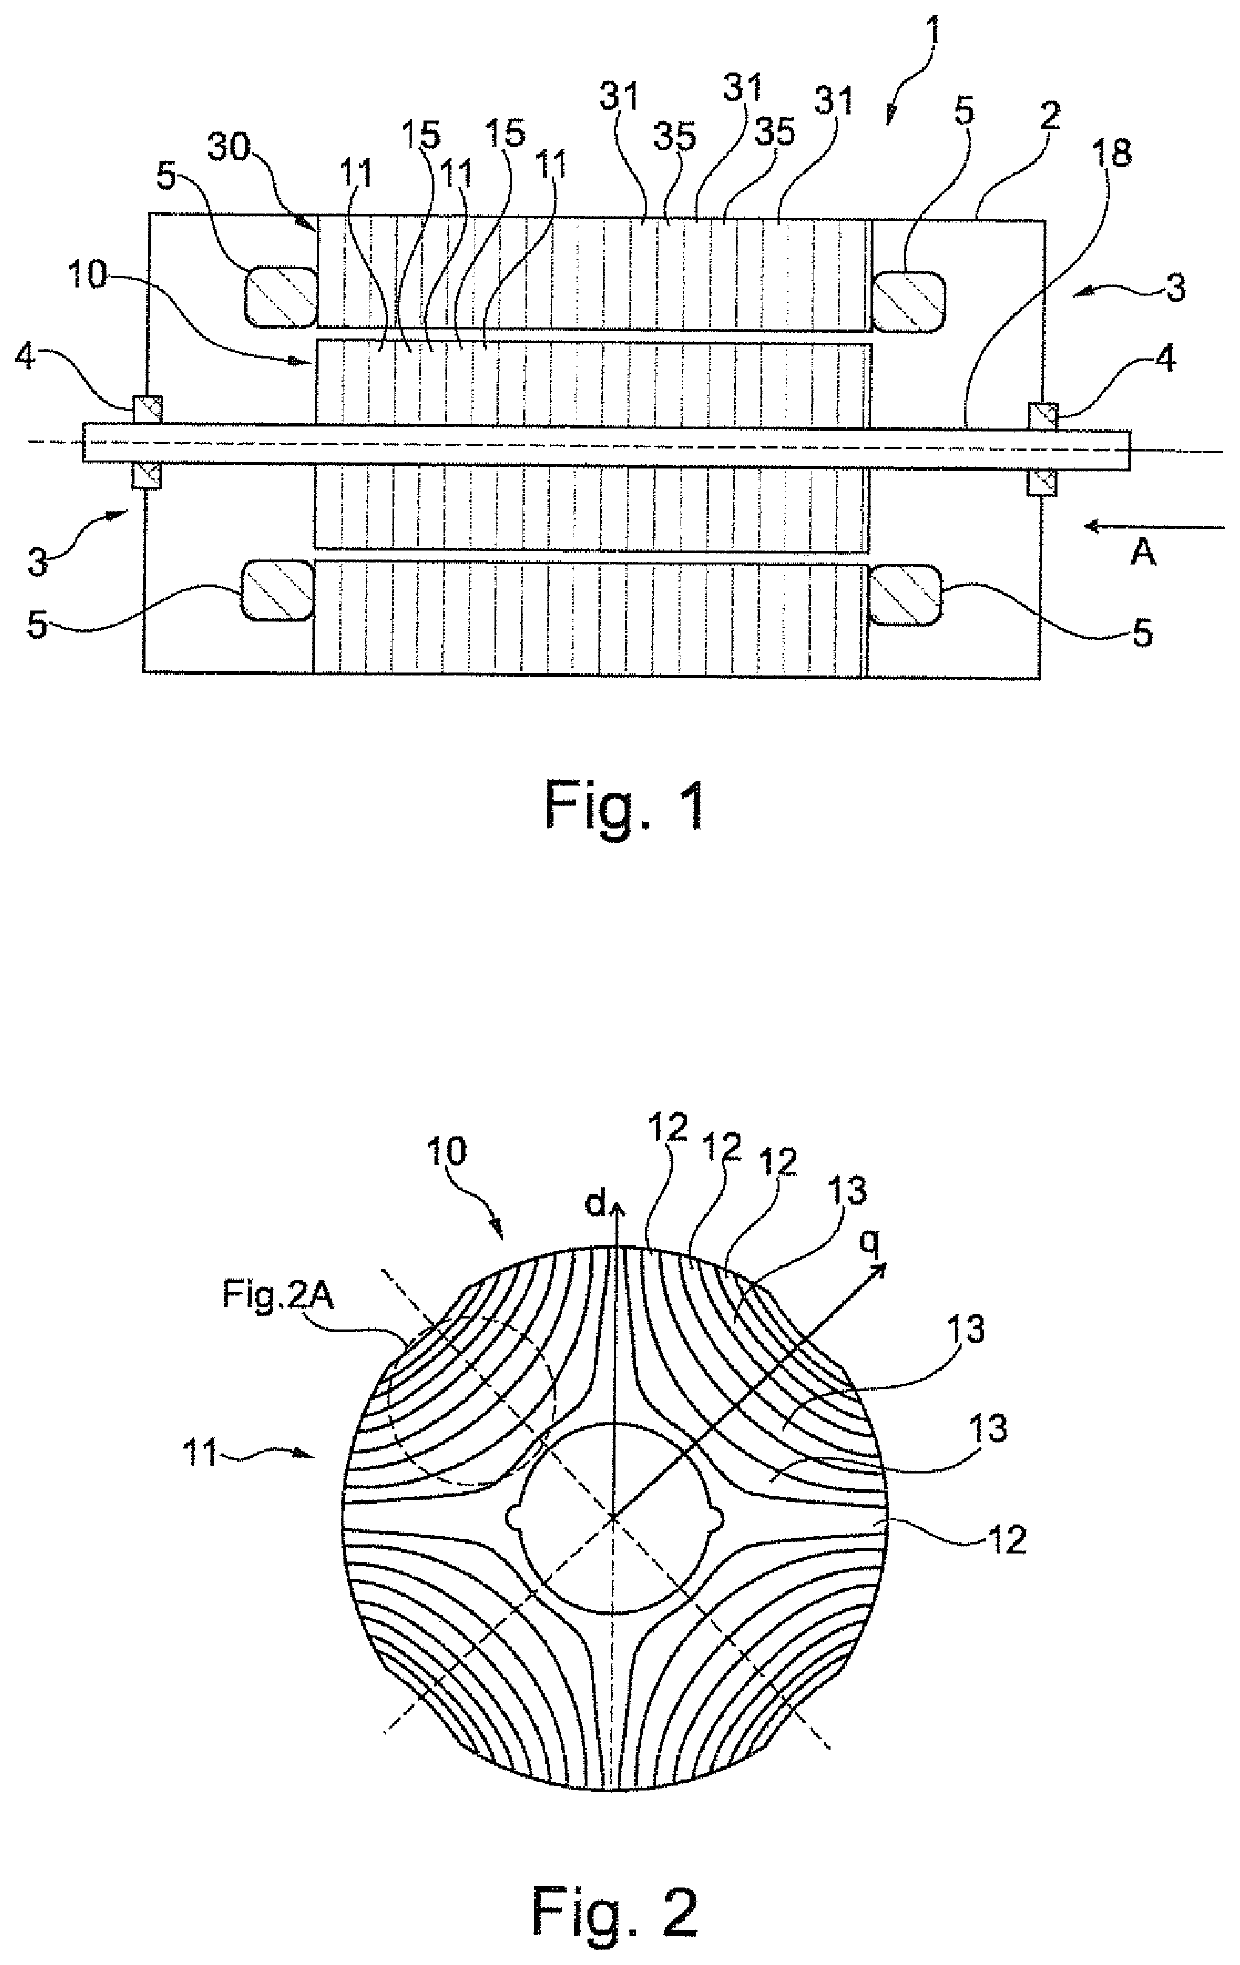 Rotor for a reluctance machine